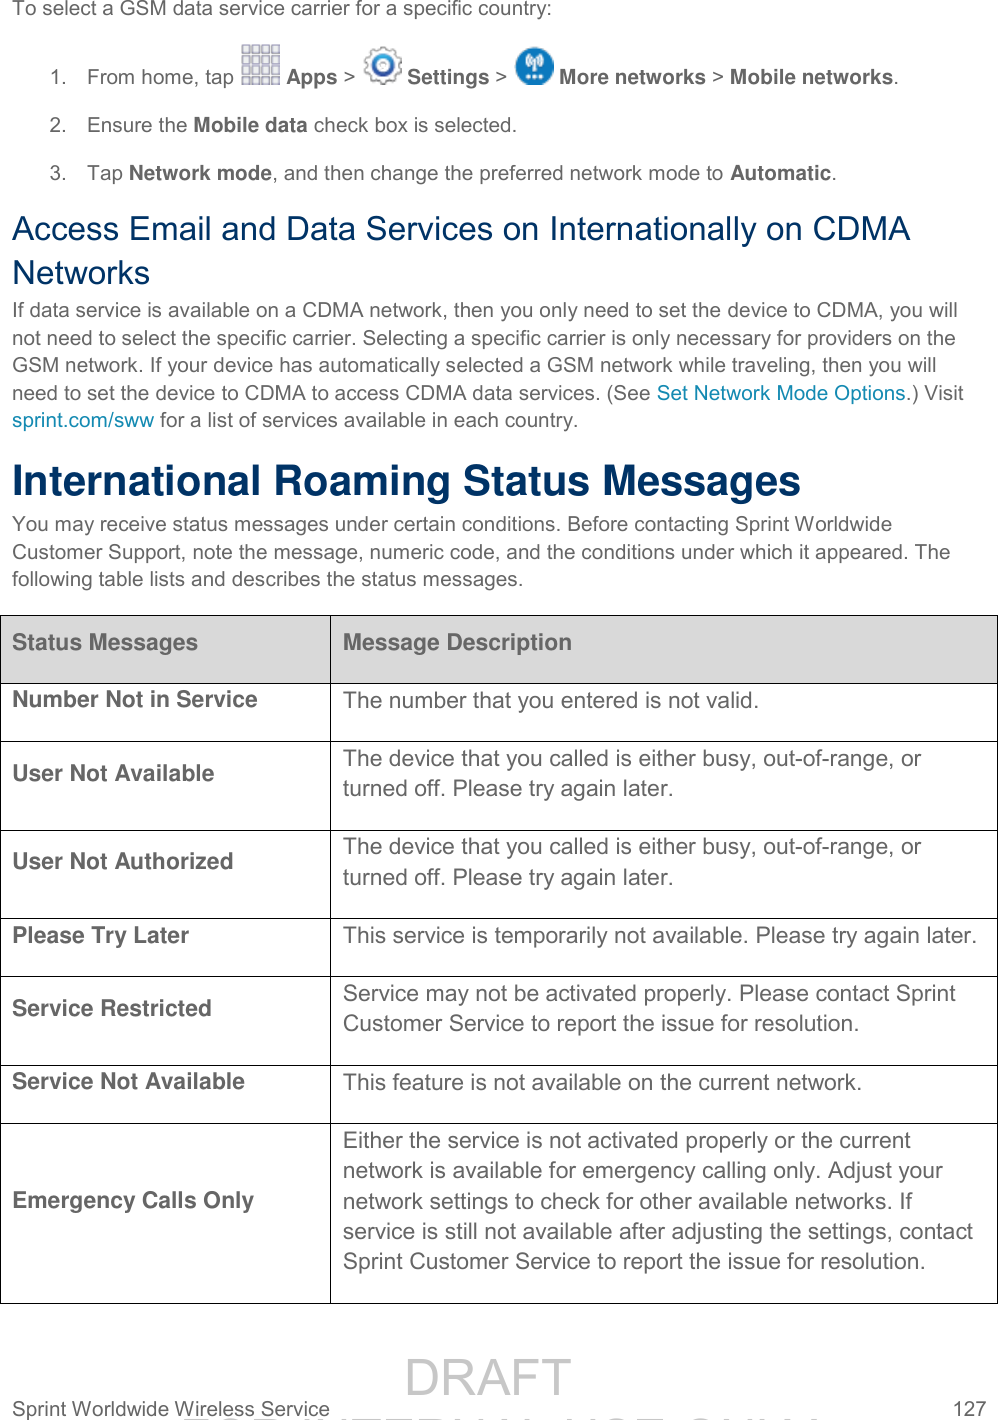                 DRAFT FOR INTERNAL USE ONLY Sprint Worldwide Wireless Service  127   To select a GSM data service carrier for a specific country:  1.  From home, tap   Apps &gt;   Settings &gt;   More networks &gt; Mobile networks. 2.  Ensure the Mobile data check box is selected. 3.  Tap Network mode, and then change the preferred network mode to Automatic. Access Email and Data Services on Internationally on CDMA Networks If data service is available on a CDMA network, then you only need to set the device to CDMA, you will not need to select the specific carrier. Selecting a specific carrier is only necessary for providers on the GSM network. If your device has automatically selected a GSM network while traveling, then you will need to set the device to CDMA to access CDMA data services. (See Set Network Mode Options.) Visit sprint.com/sww for a list of services available in each country. International Roaming Status Messages You may receive status messages under certain conditions. Before contacting Sprint Worldwide Customer Support, note the message, numeric code, and the conditions under which it appeared. The following table lists and describes the status messages.  Status Messages Message Description Number Not in Service The number that you entered is not valid.  User Not Available The device that you called is either busy, out-of-range, or turned off. Please try again later.  User Not Authorized The device that you called is either busy, out-of-range, or turned off. Please try again later.  Please Try Later This service is temporarily not available. Please try again later.  Service Restricted Service may not be activated properly. Please contact Sprint Customer Service to report the issue for resolution.  Service Not Available This feature is not available on the current network.  Emergency Calls Only Either the service is not activated properly or the current network is available for emergency calling only. Adjust your network settings to check for other available networks. If service is still not available after adjusting the settings, contact Sprint Customer Service to report the issue for resolution.  